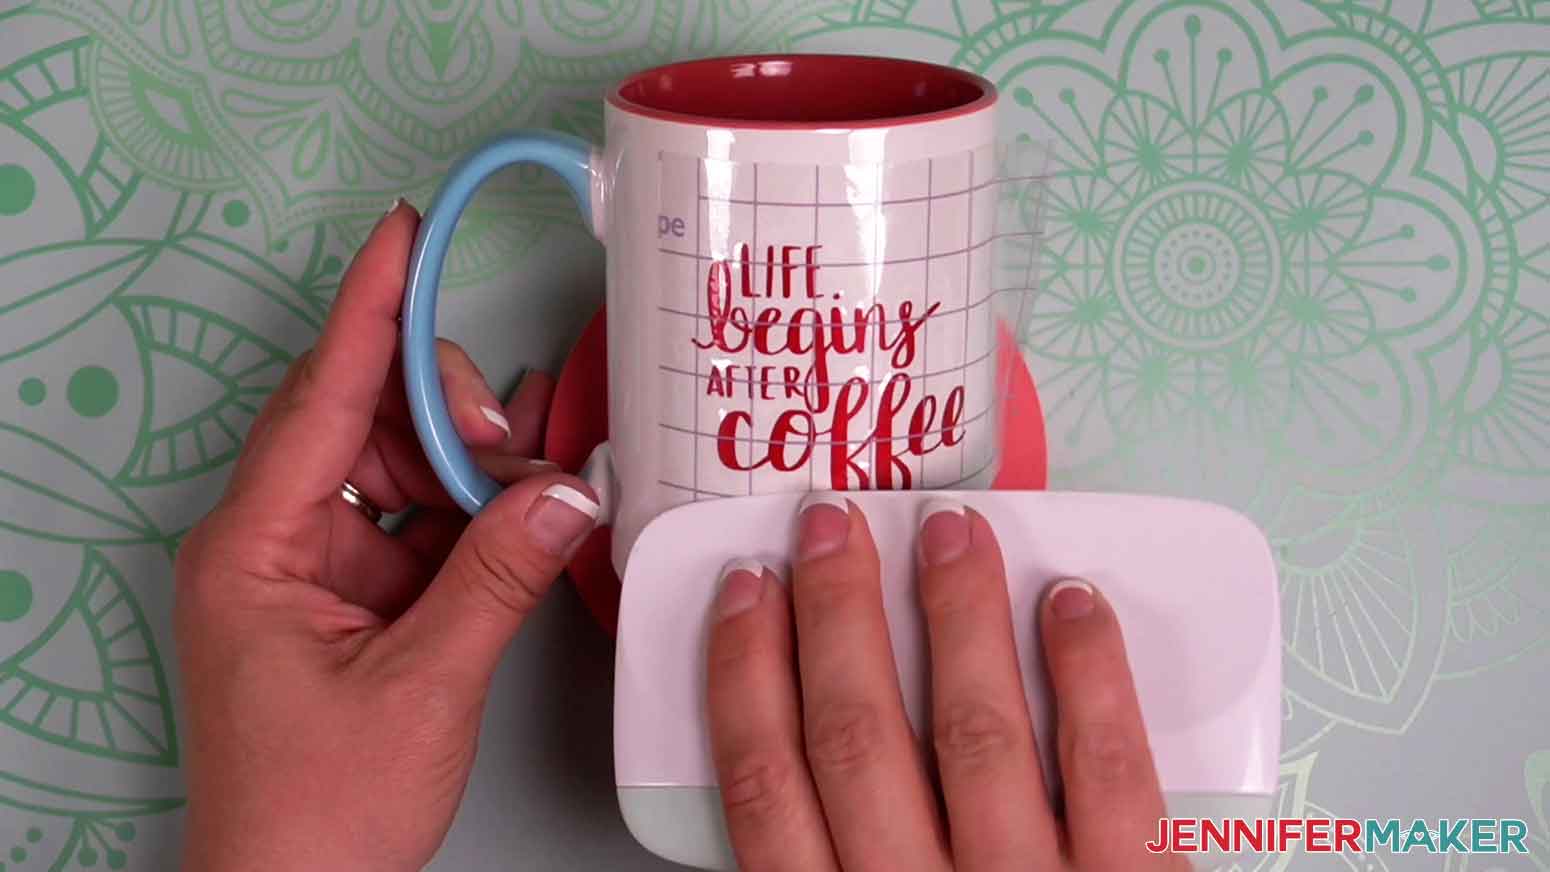 Use a scraper tool over the strong grip transfer tape to adhere red shimmer vinyl to the coffee mug.